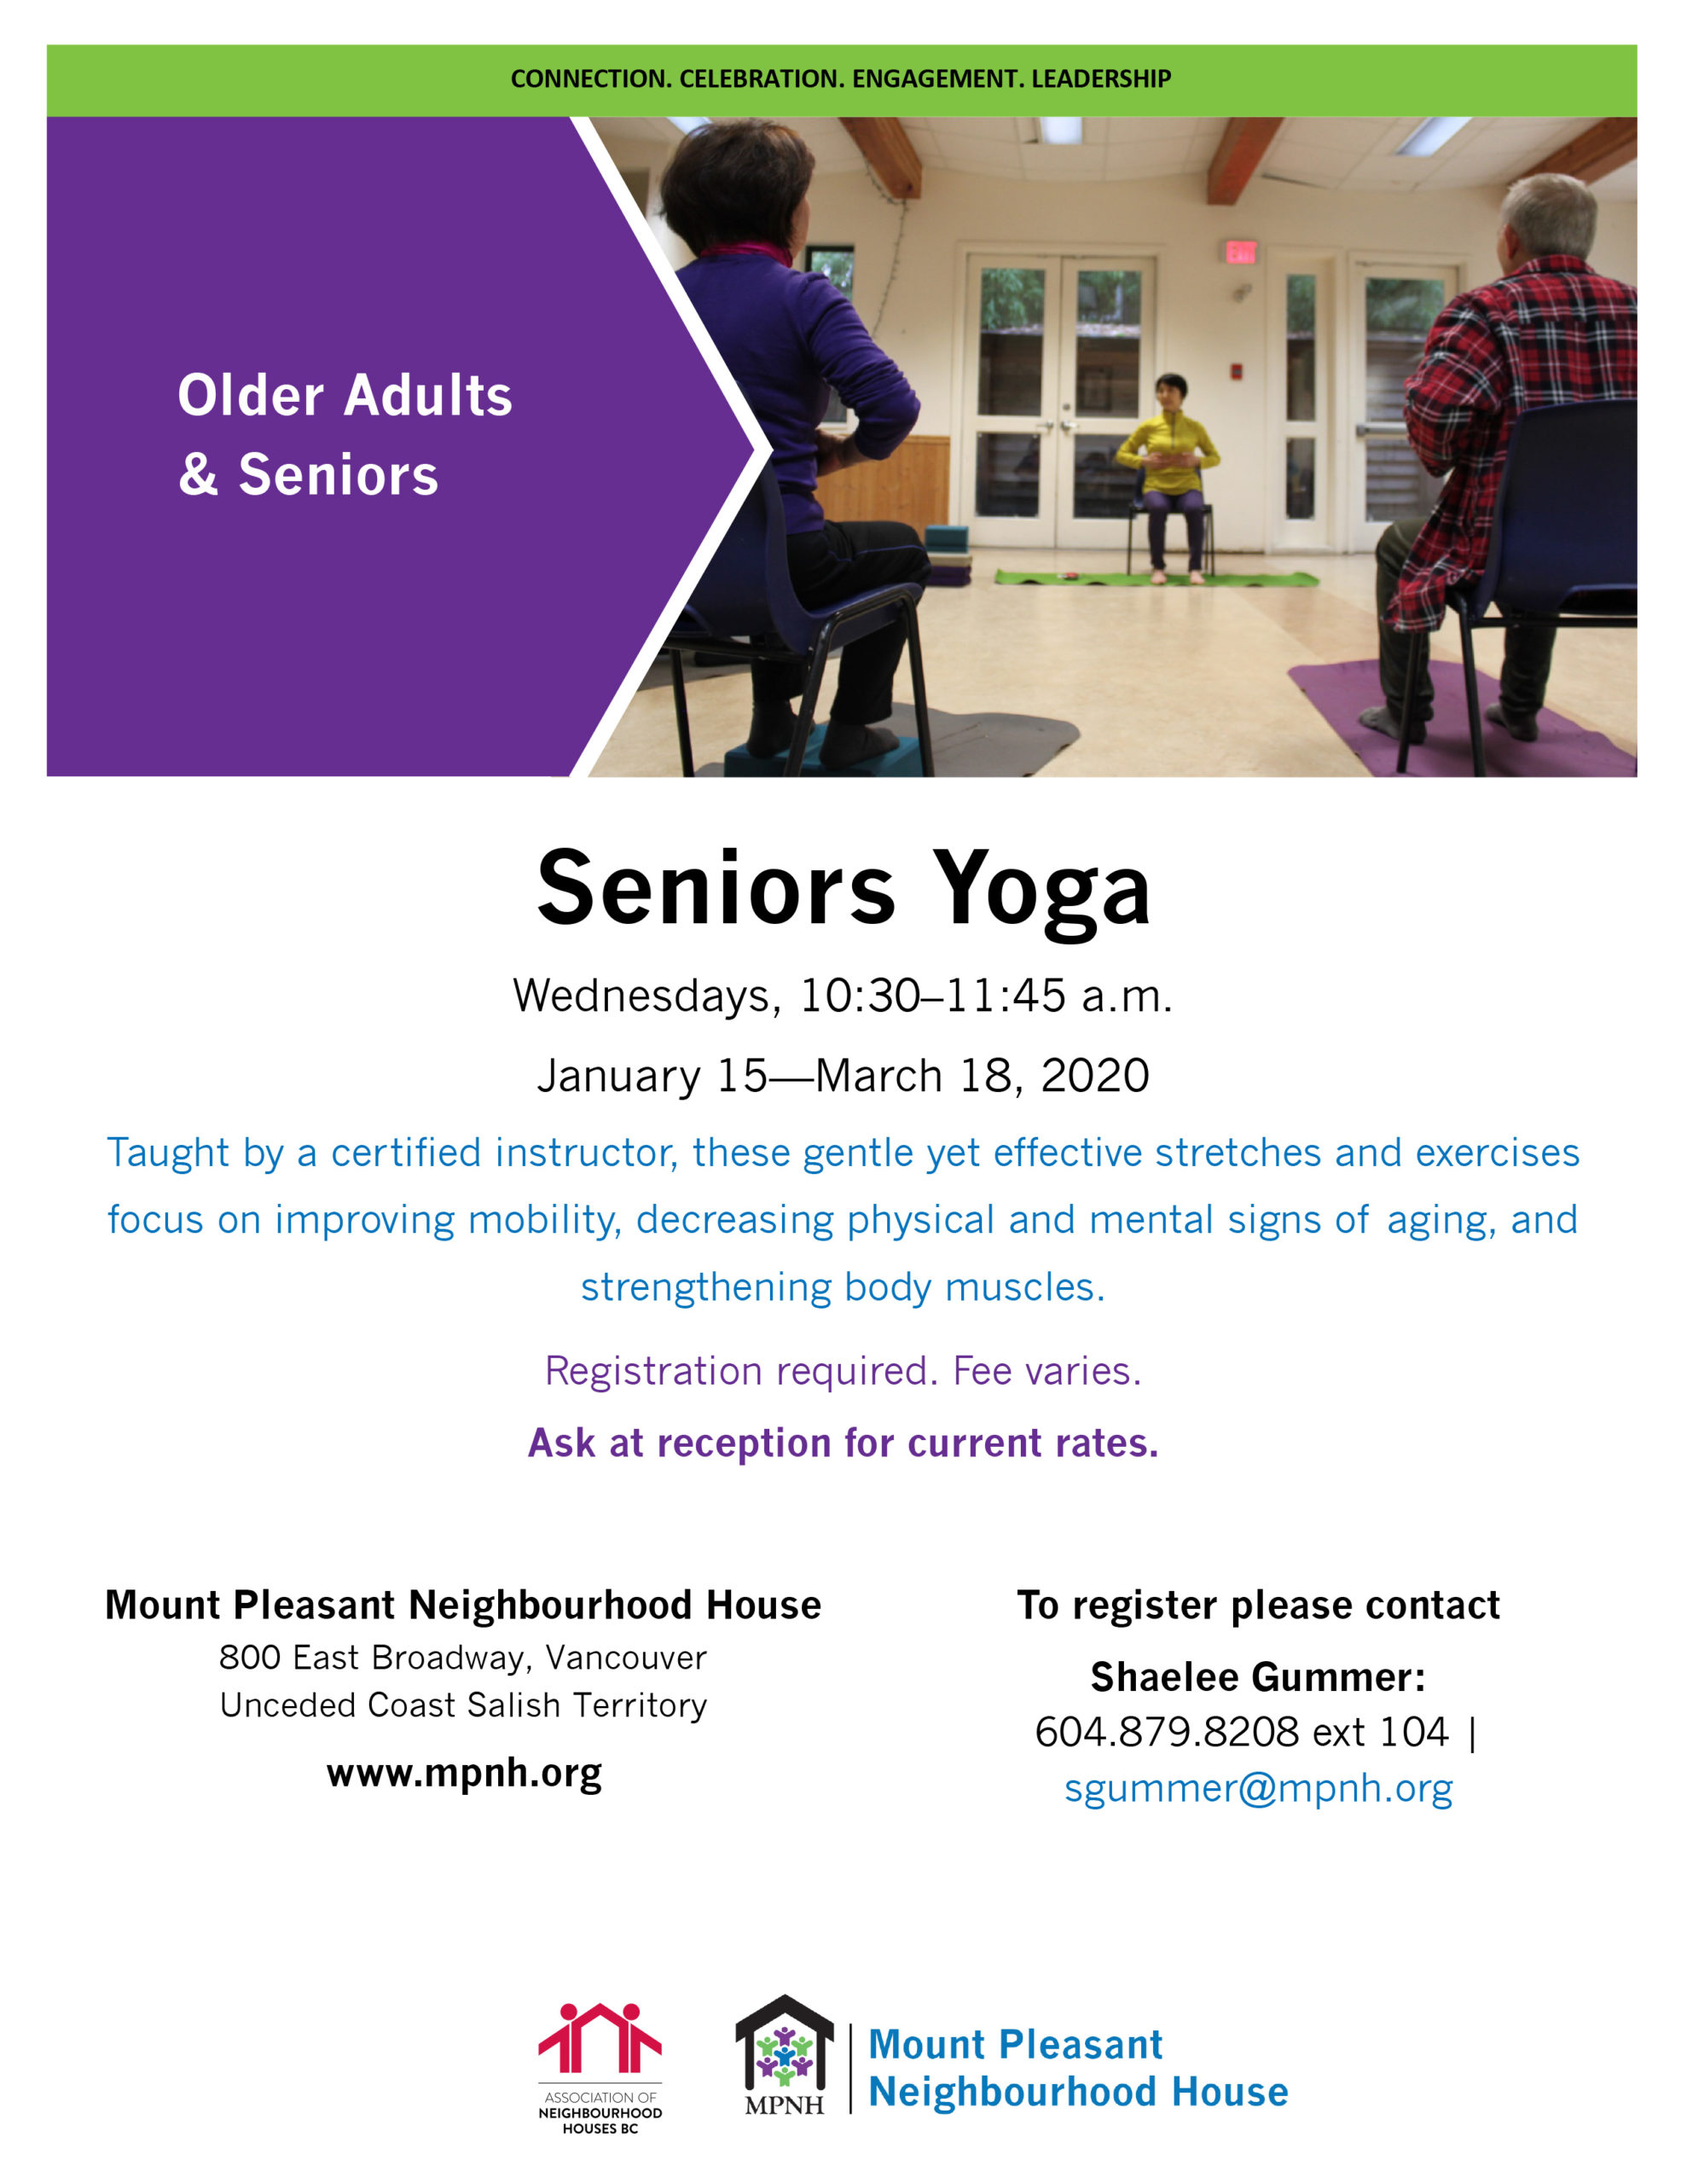 Poster for Seniors Yoga showing participants enjoying seated stretches